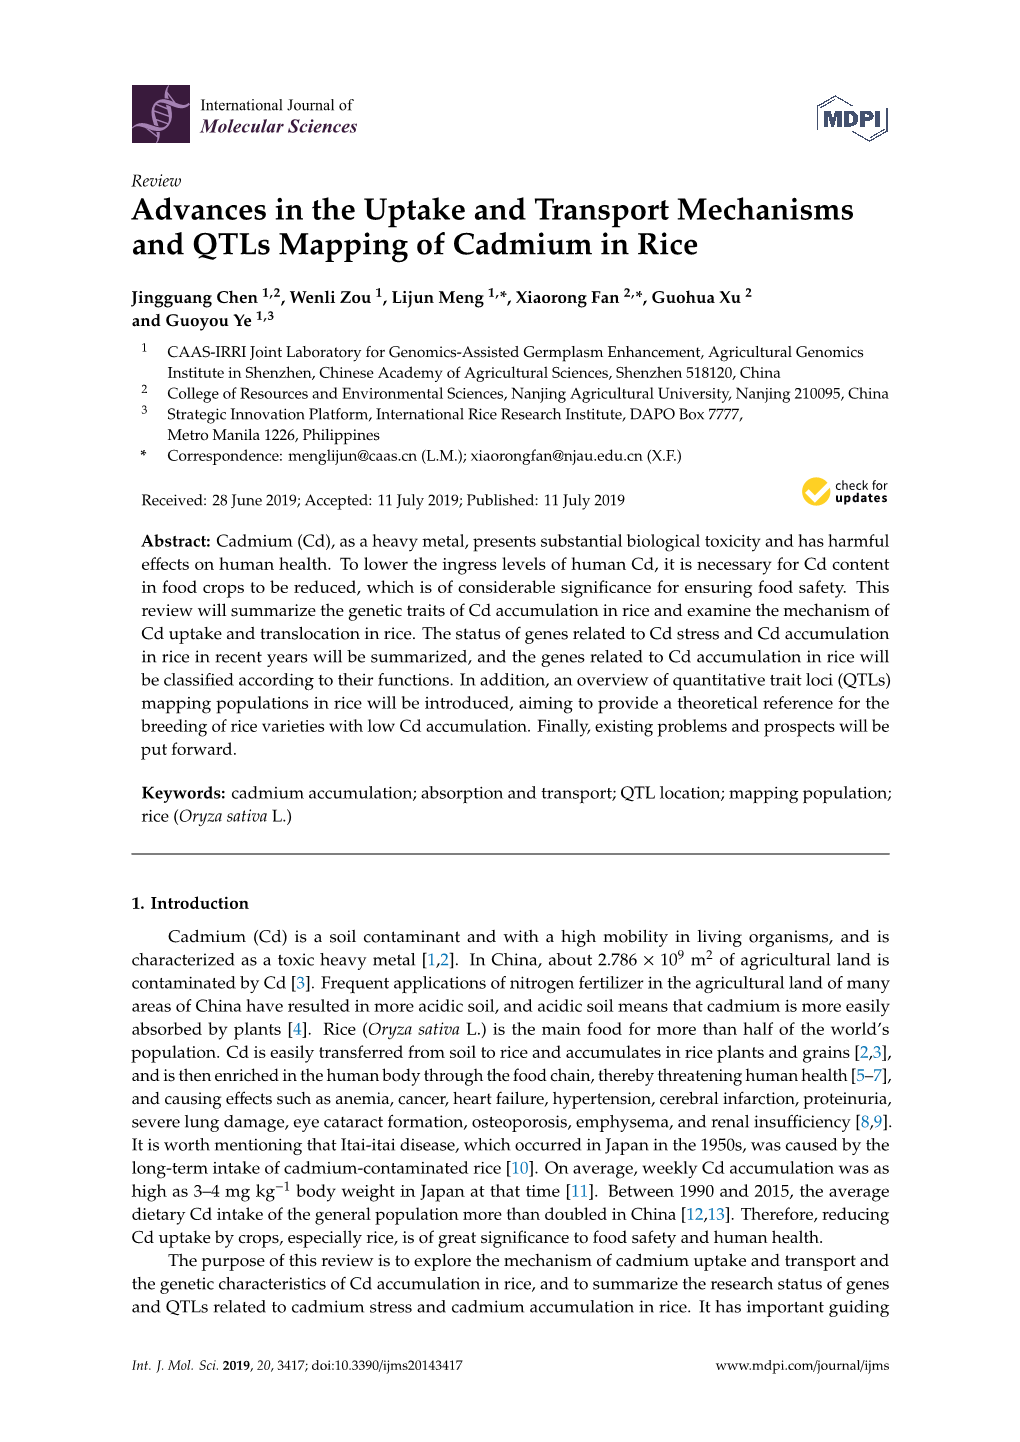 Advances in the Uptake and Transport Mechanisms and Qtls Mapping of Cadmium in Rice